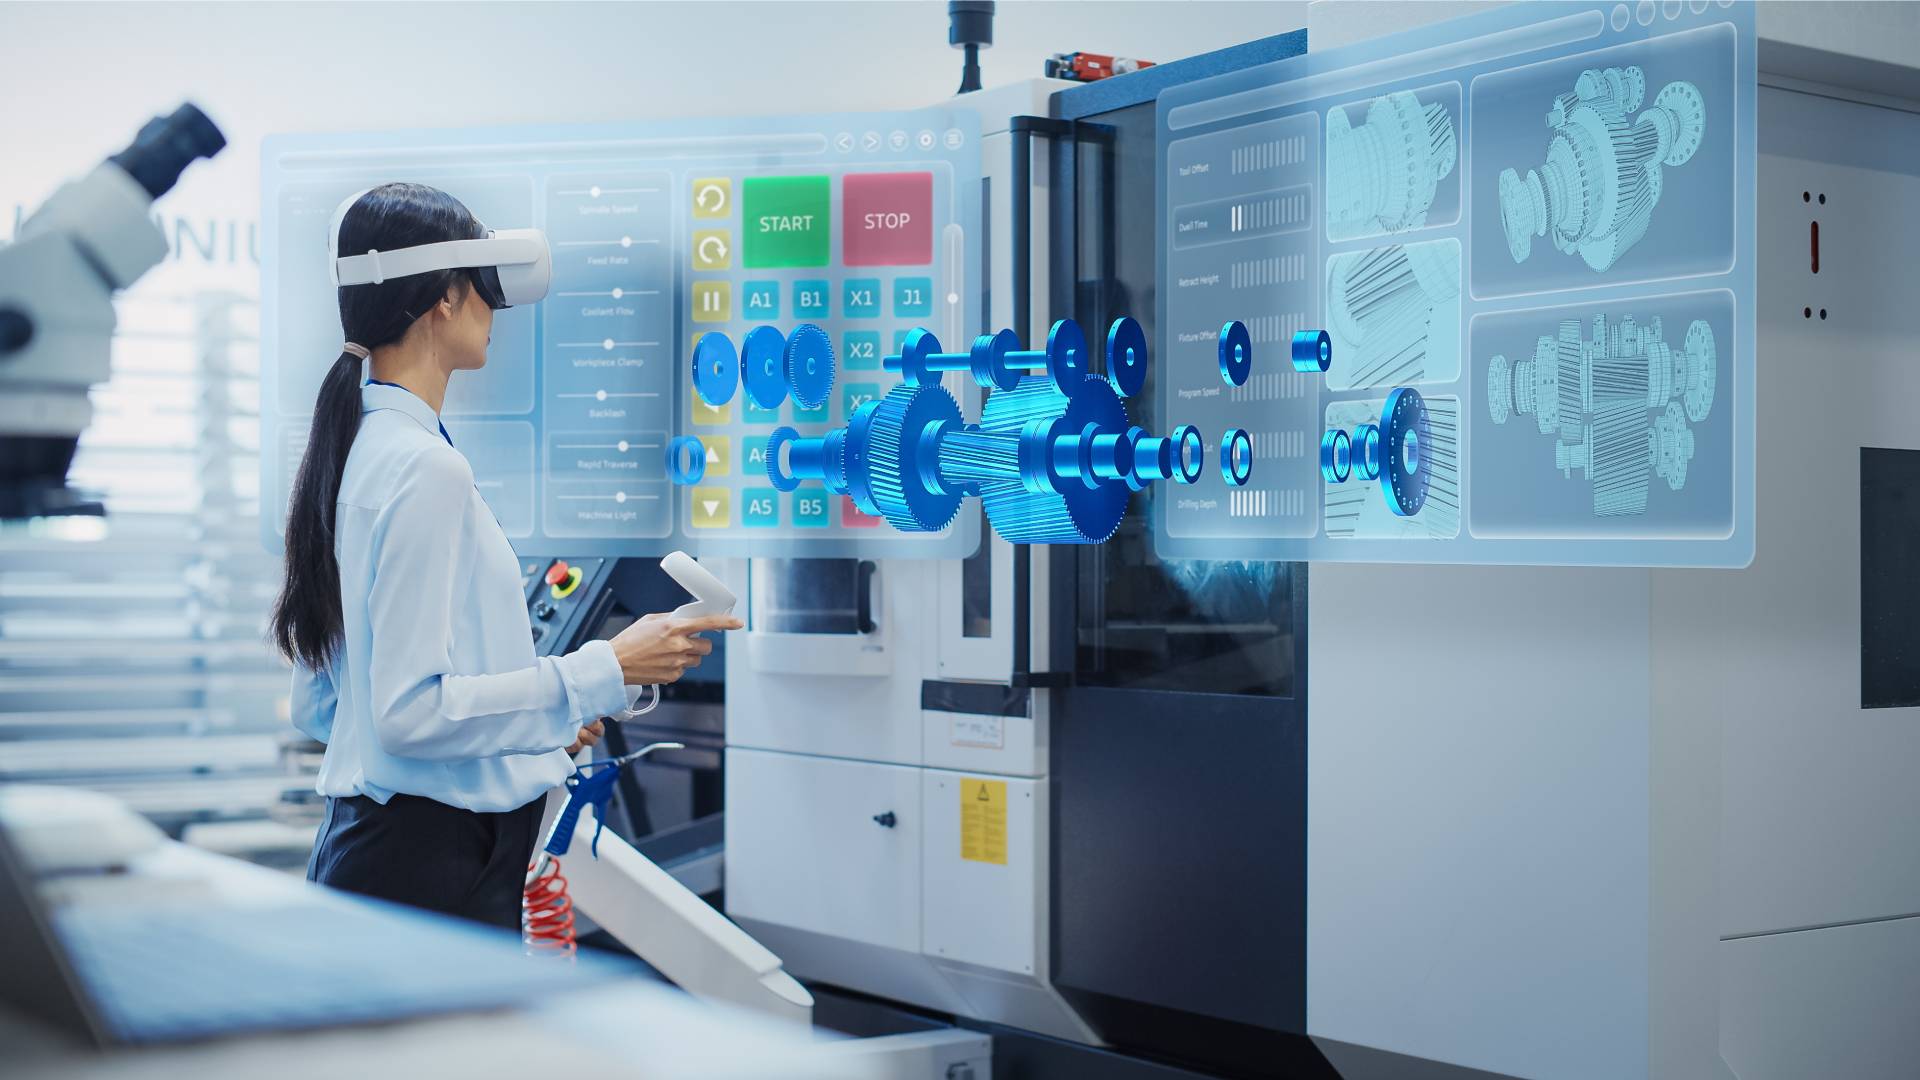 Professional Research and Development Specialist Wearing a Virtual Reality Headset, Managing Settings on an Industrial Machine at a Factory Facility. Digital Hologram Showing Mechanism in Action